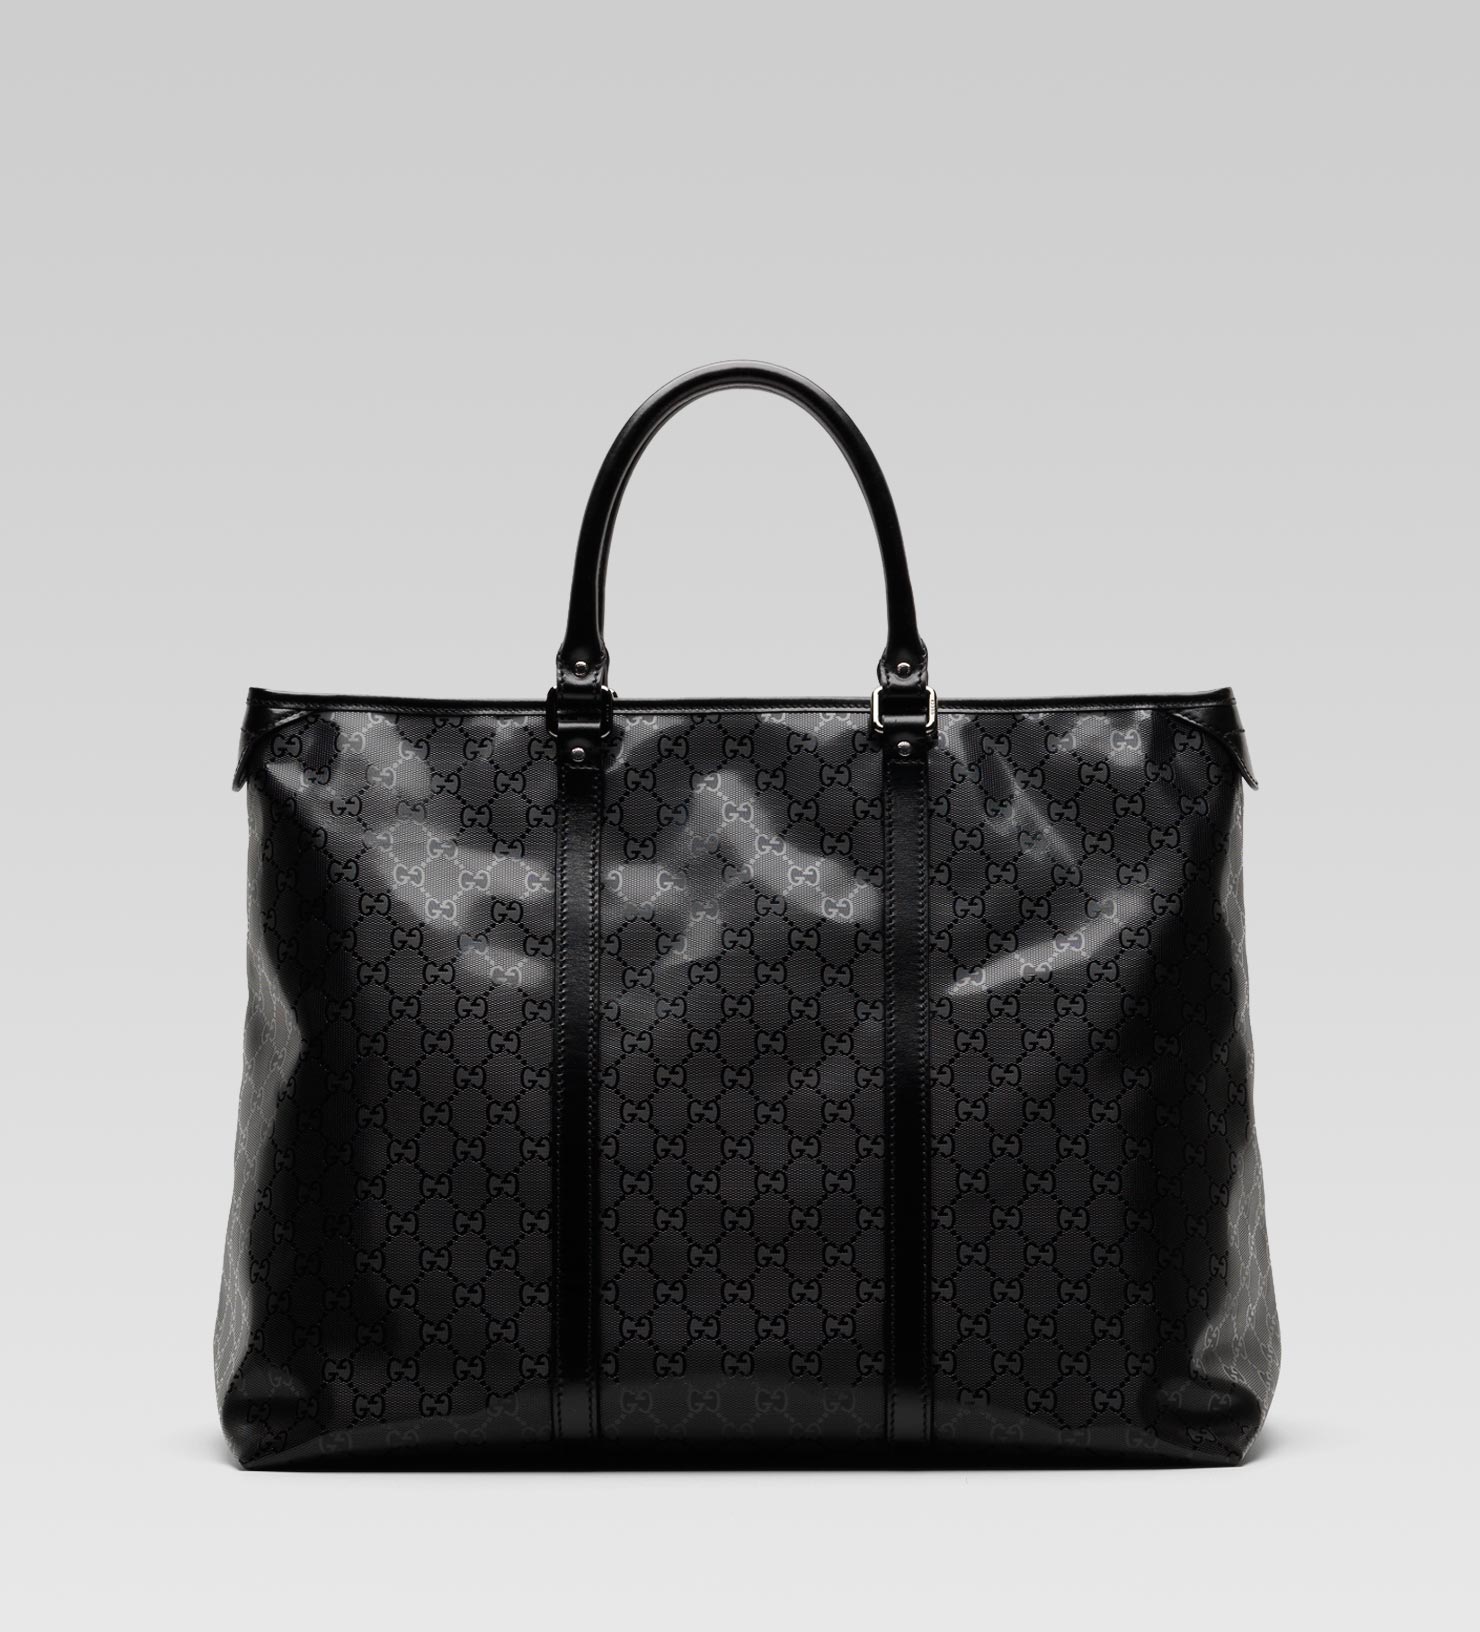 Gucci Tote Bag in Black for Men - Lyst